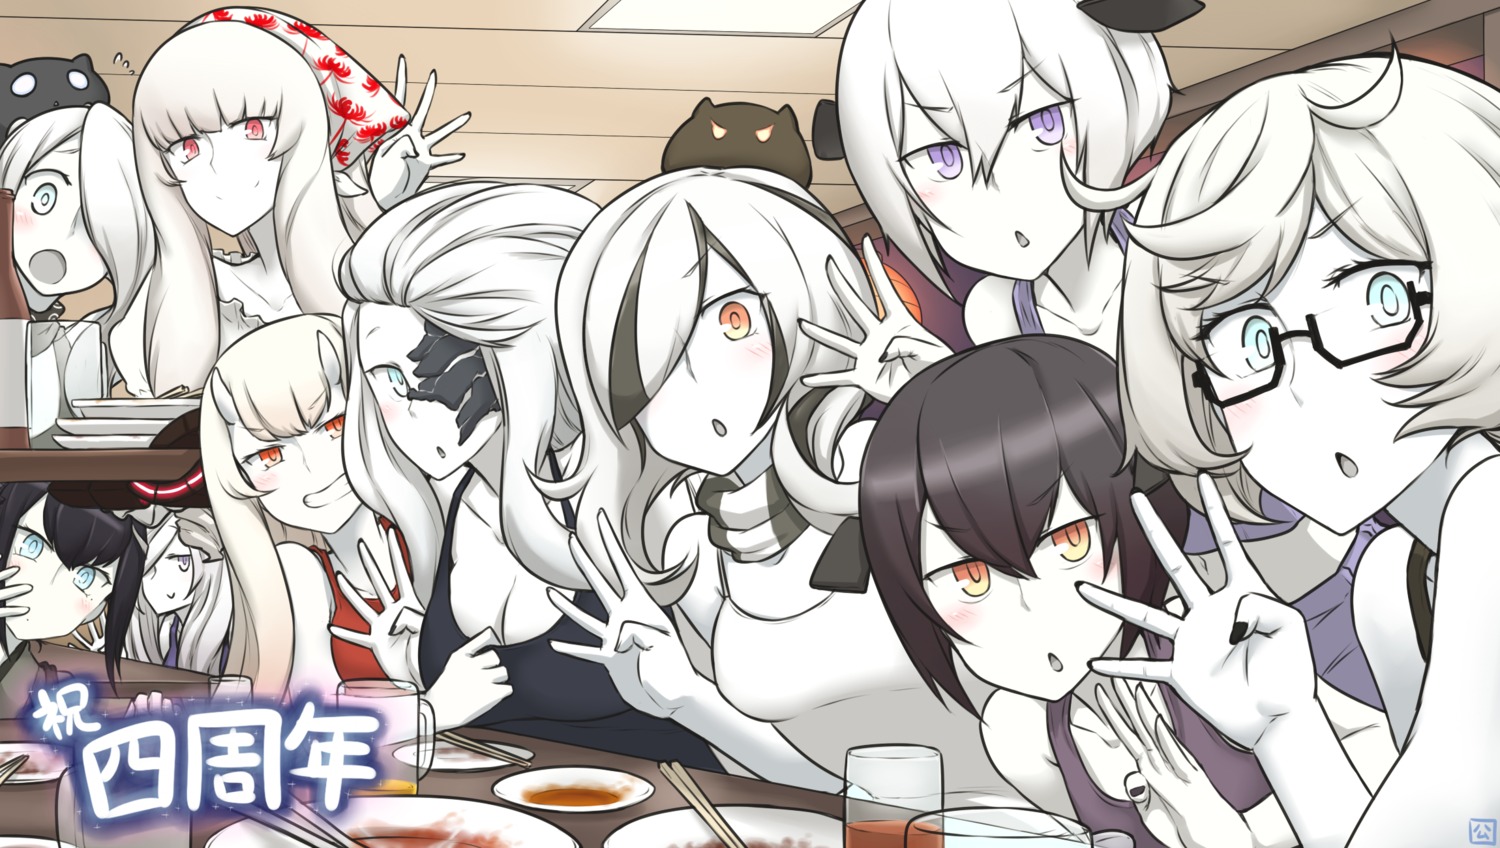 abyssal_jellyfish_hime central_hime cleavage hamu_koutarou kantai_collection licorice_hime megane seaplane_tender_water_hime seaport_summer_hime submarine_hime supply_depot_hime